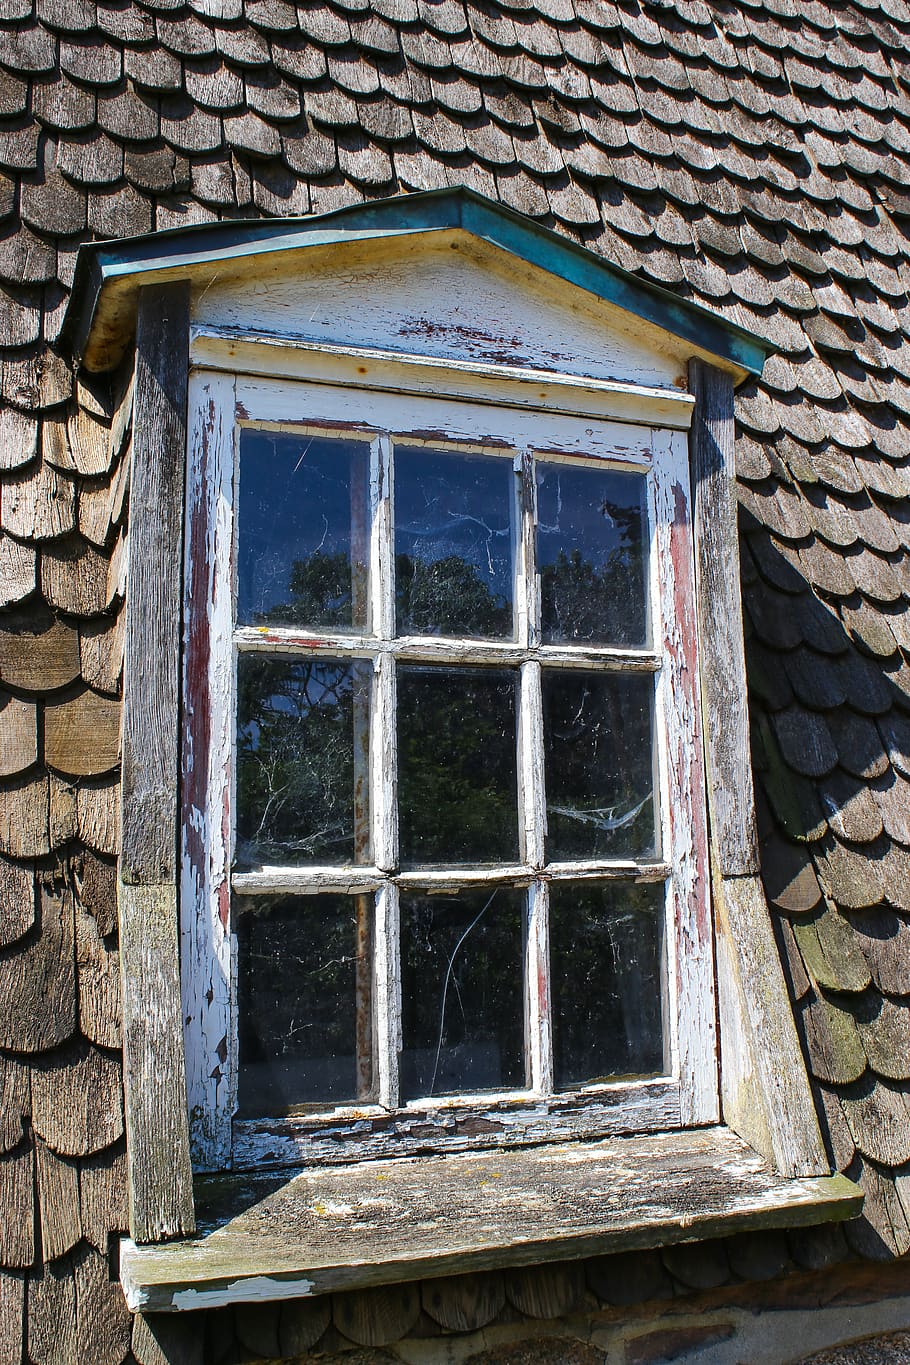 wooden windows, lattice windows, dormer, wood shingles, decay, ruin, dilapidated, lost places, built structure, window